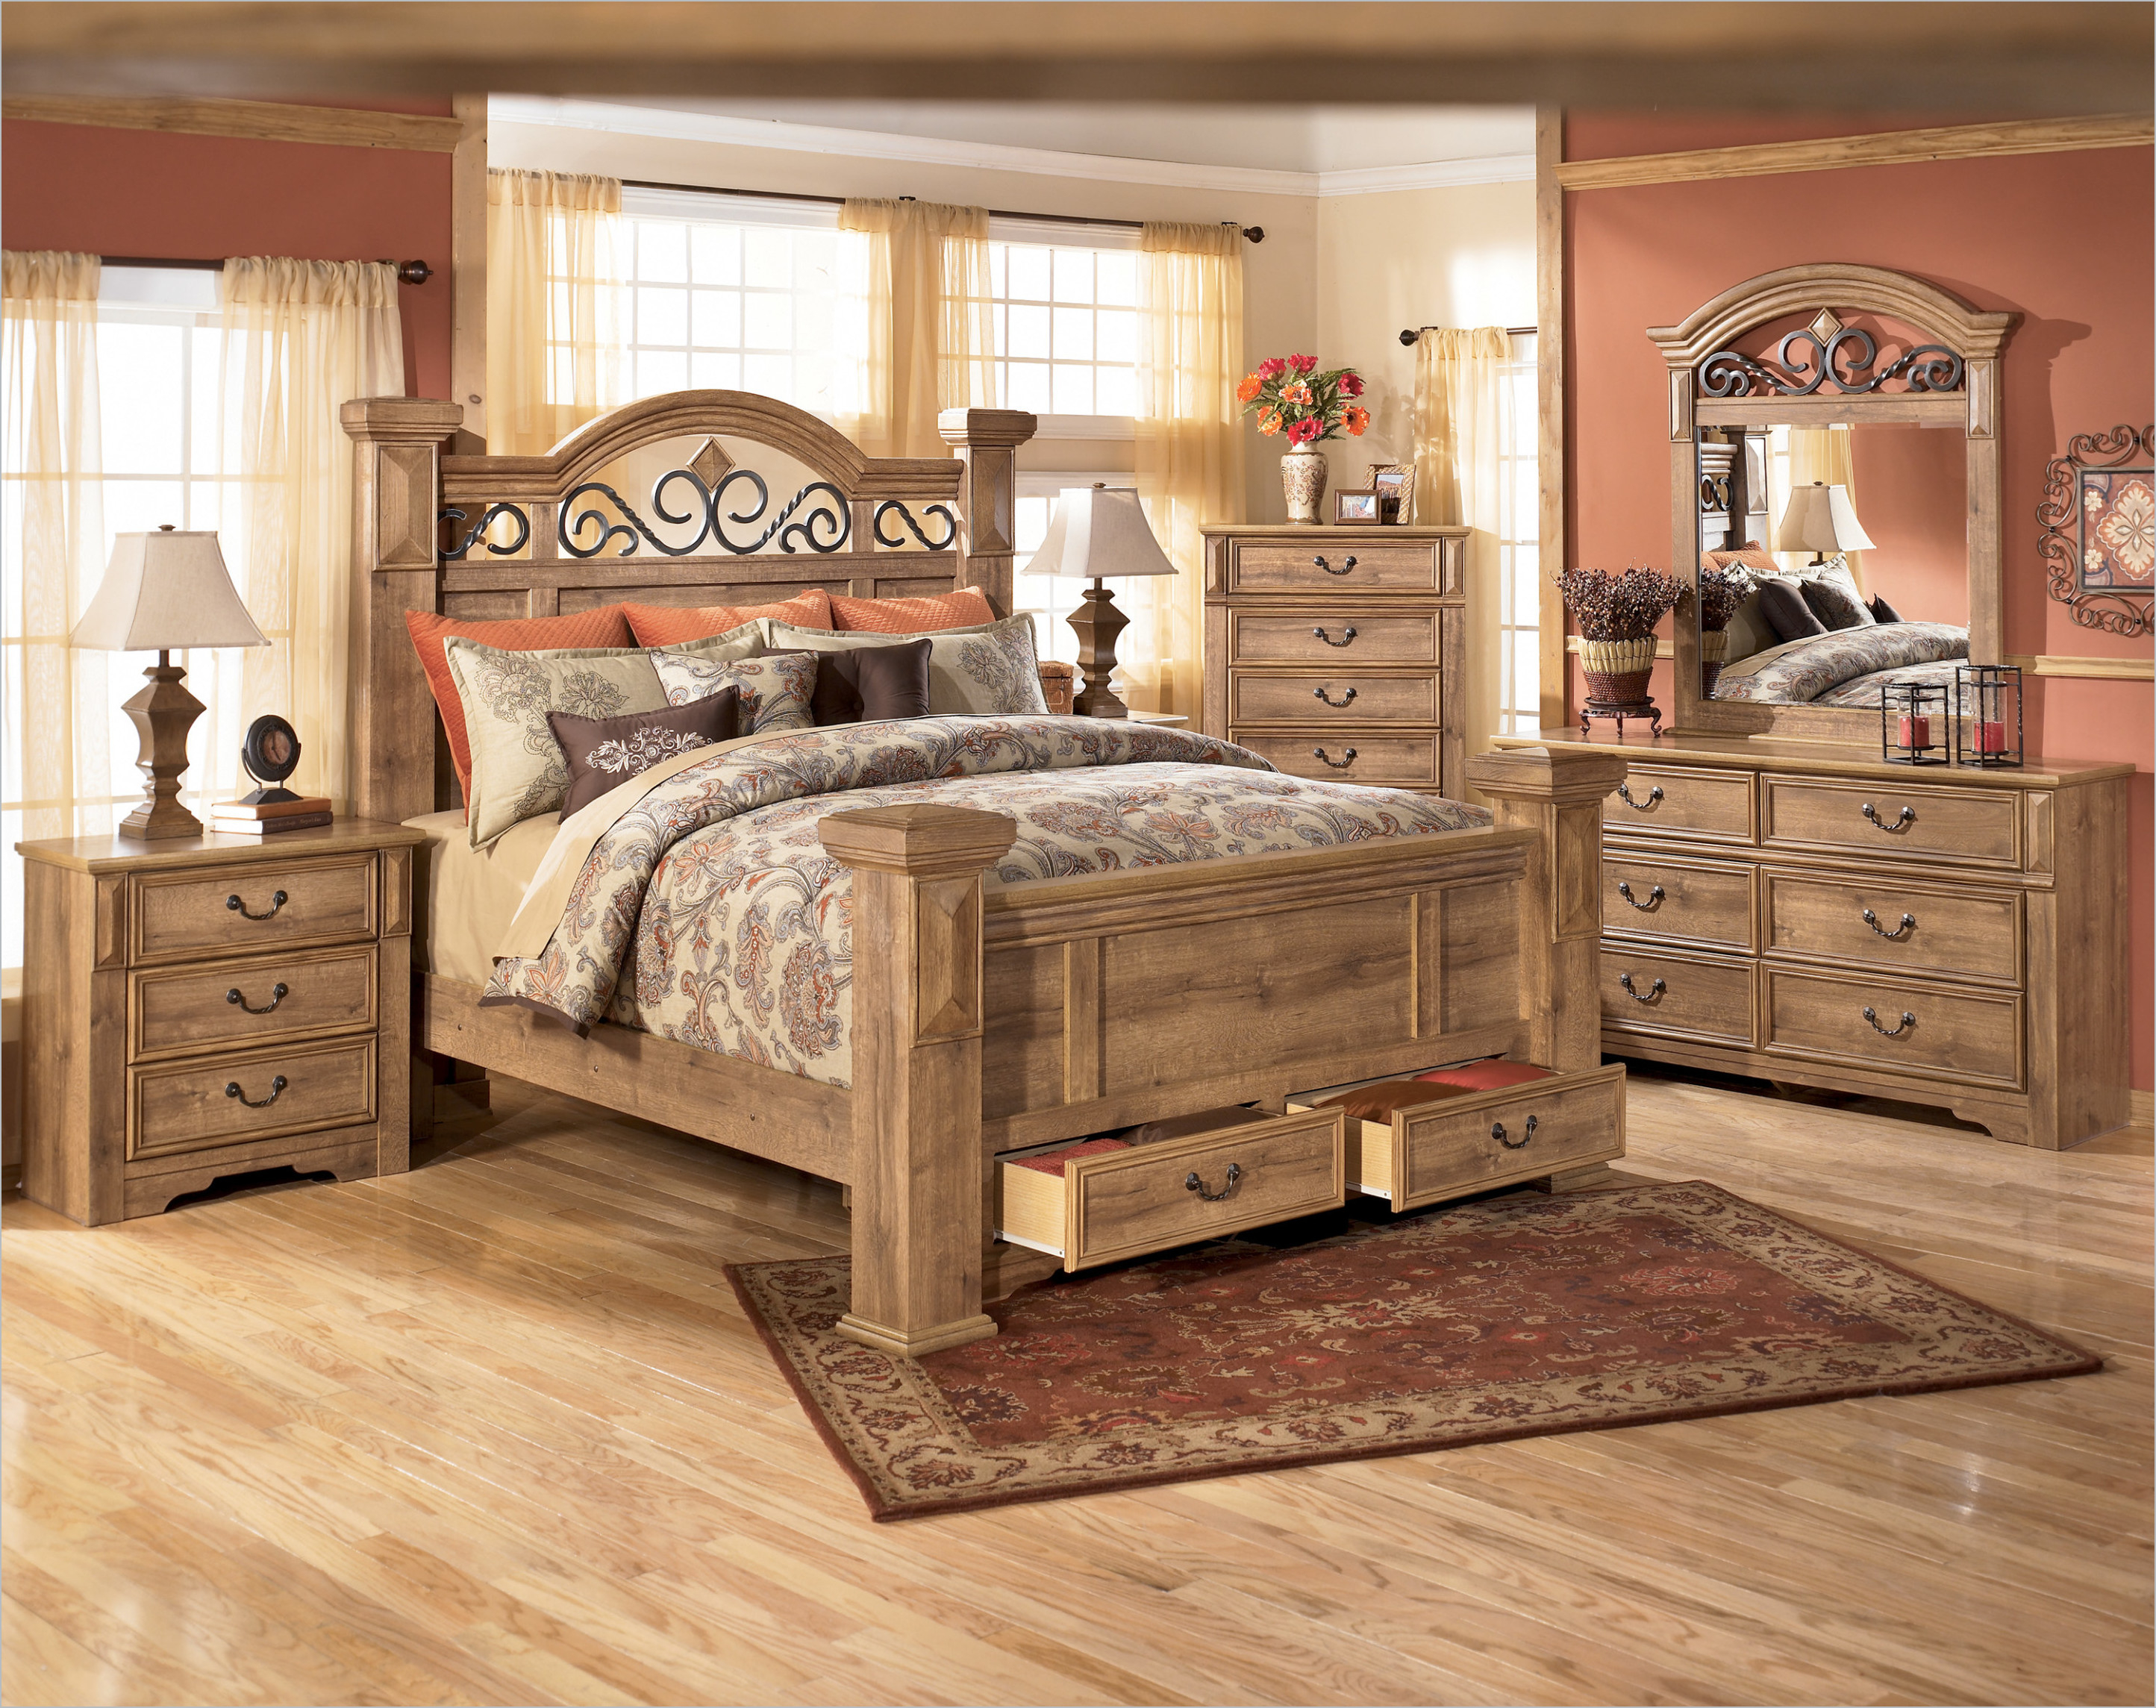 White Country Bedroom Furniture Eo Furniture throughout measurements 2889 X 2289